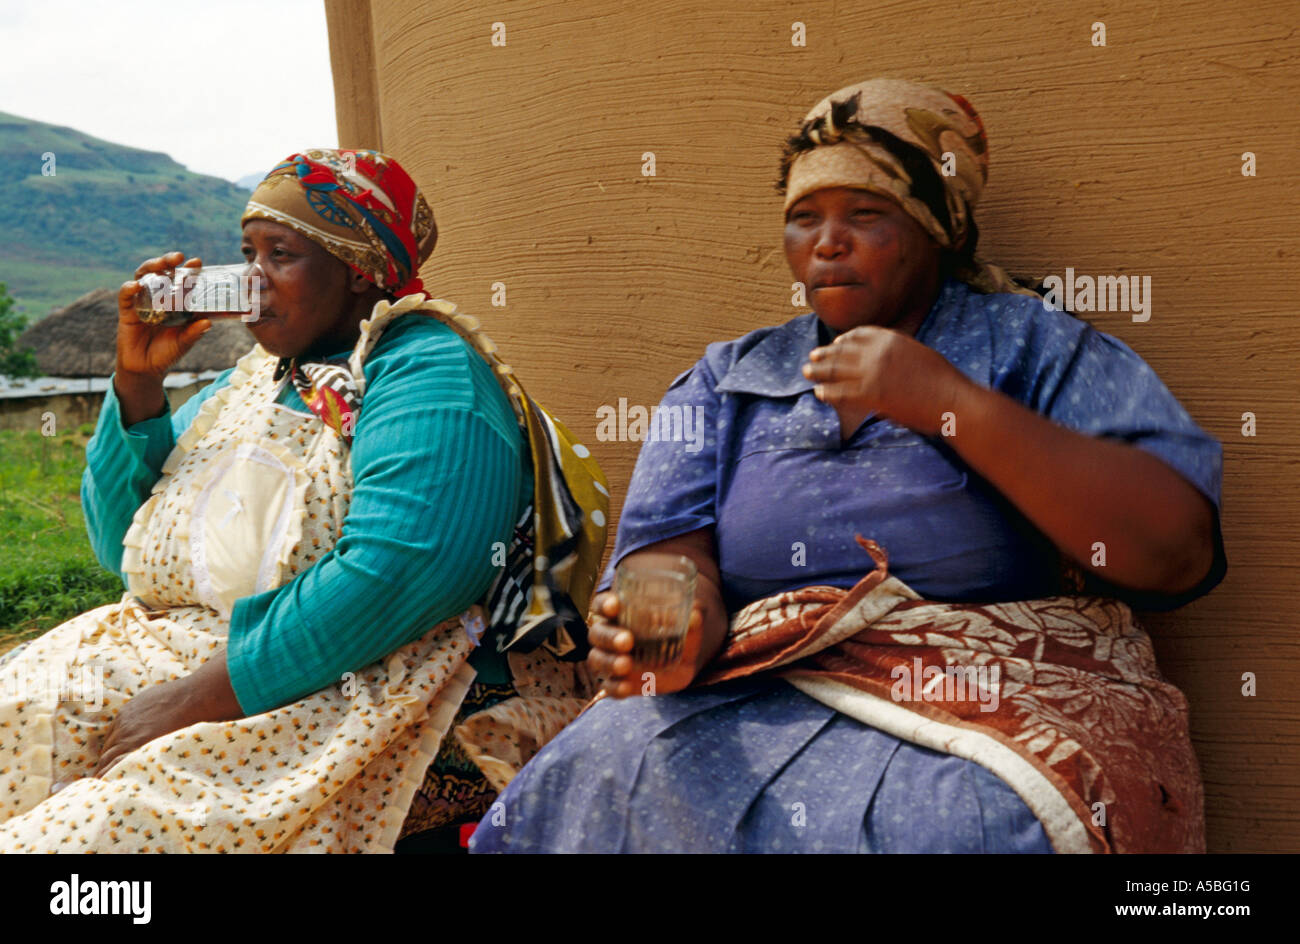 Two women resting with drink, South Africa Stock Photo